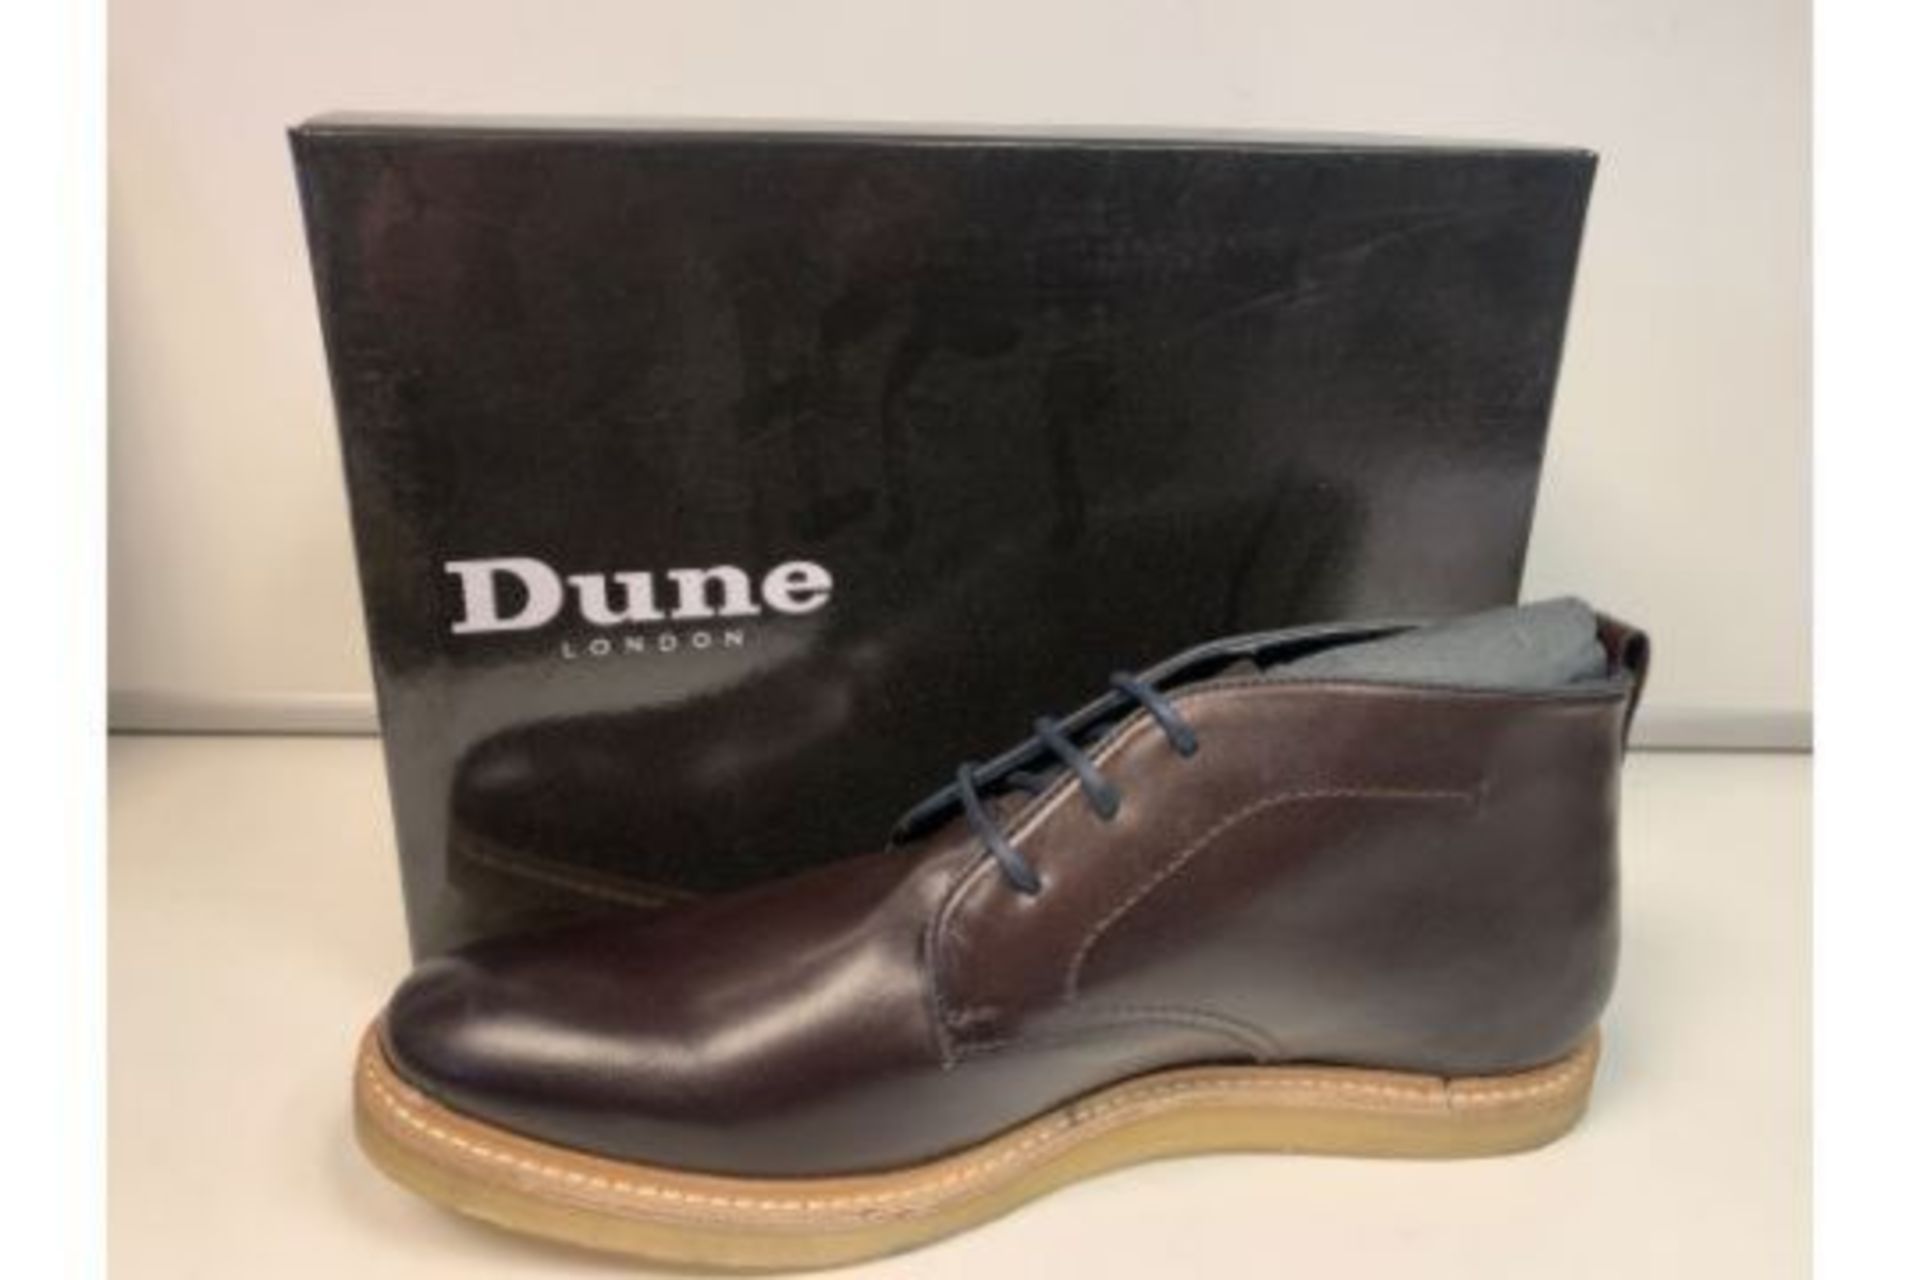 BRAND NEW DUNE LONDON DARK BROWN LEATHER CHUKKA BOOTS SIZE 8 RRP £129 - PCK